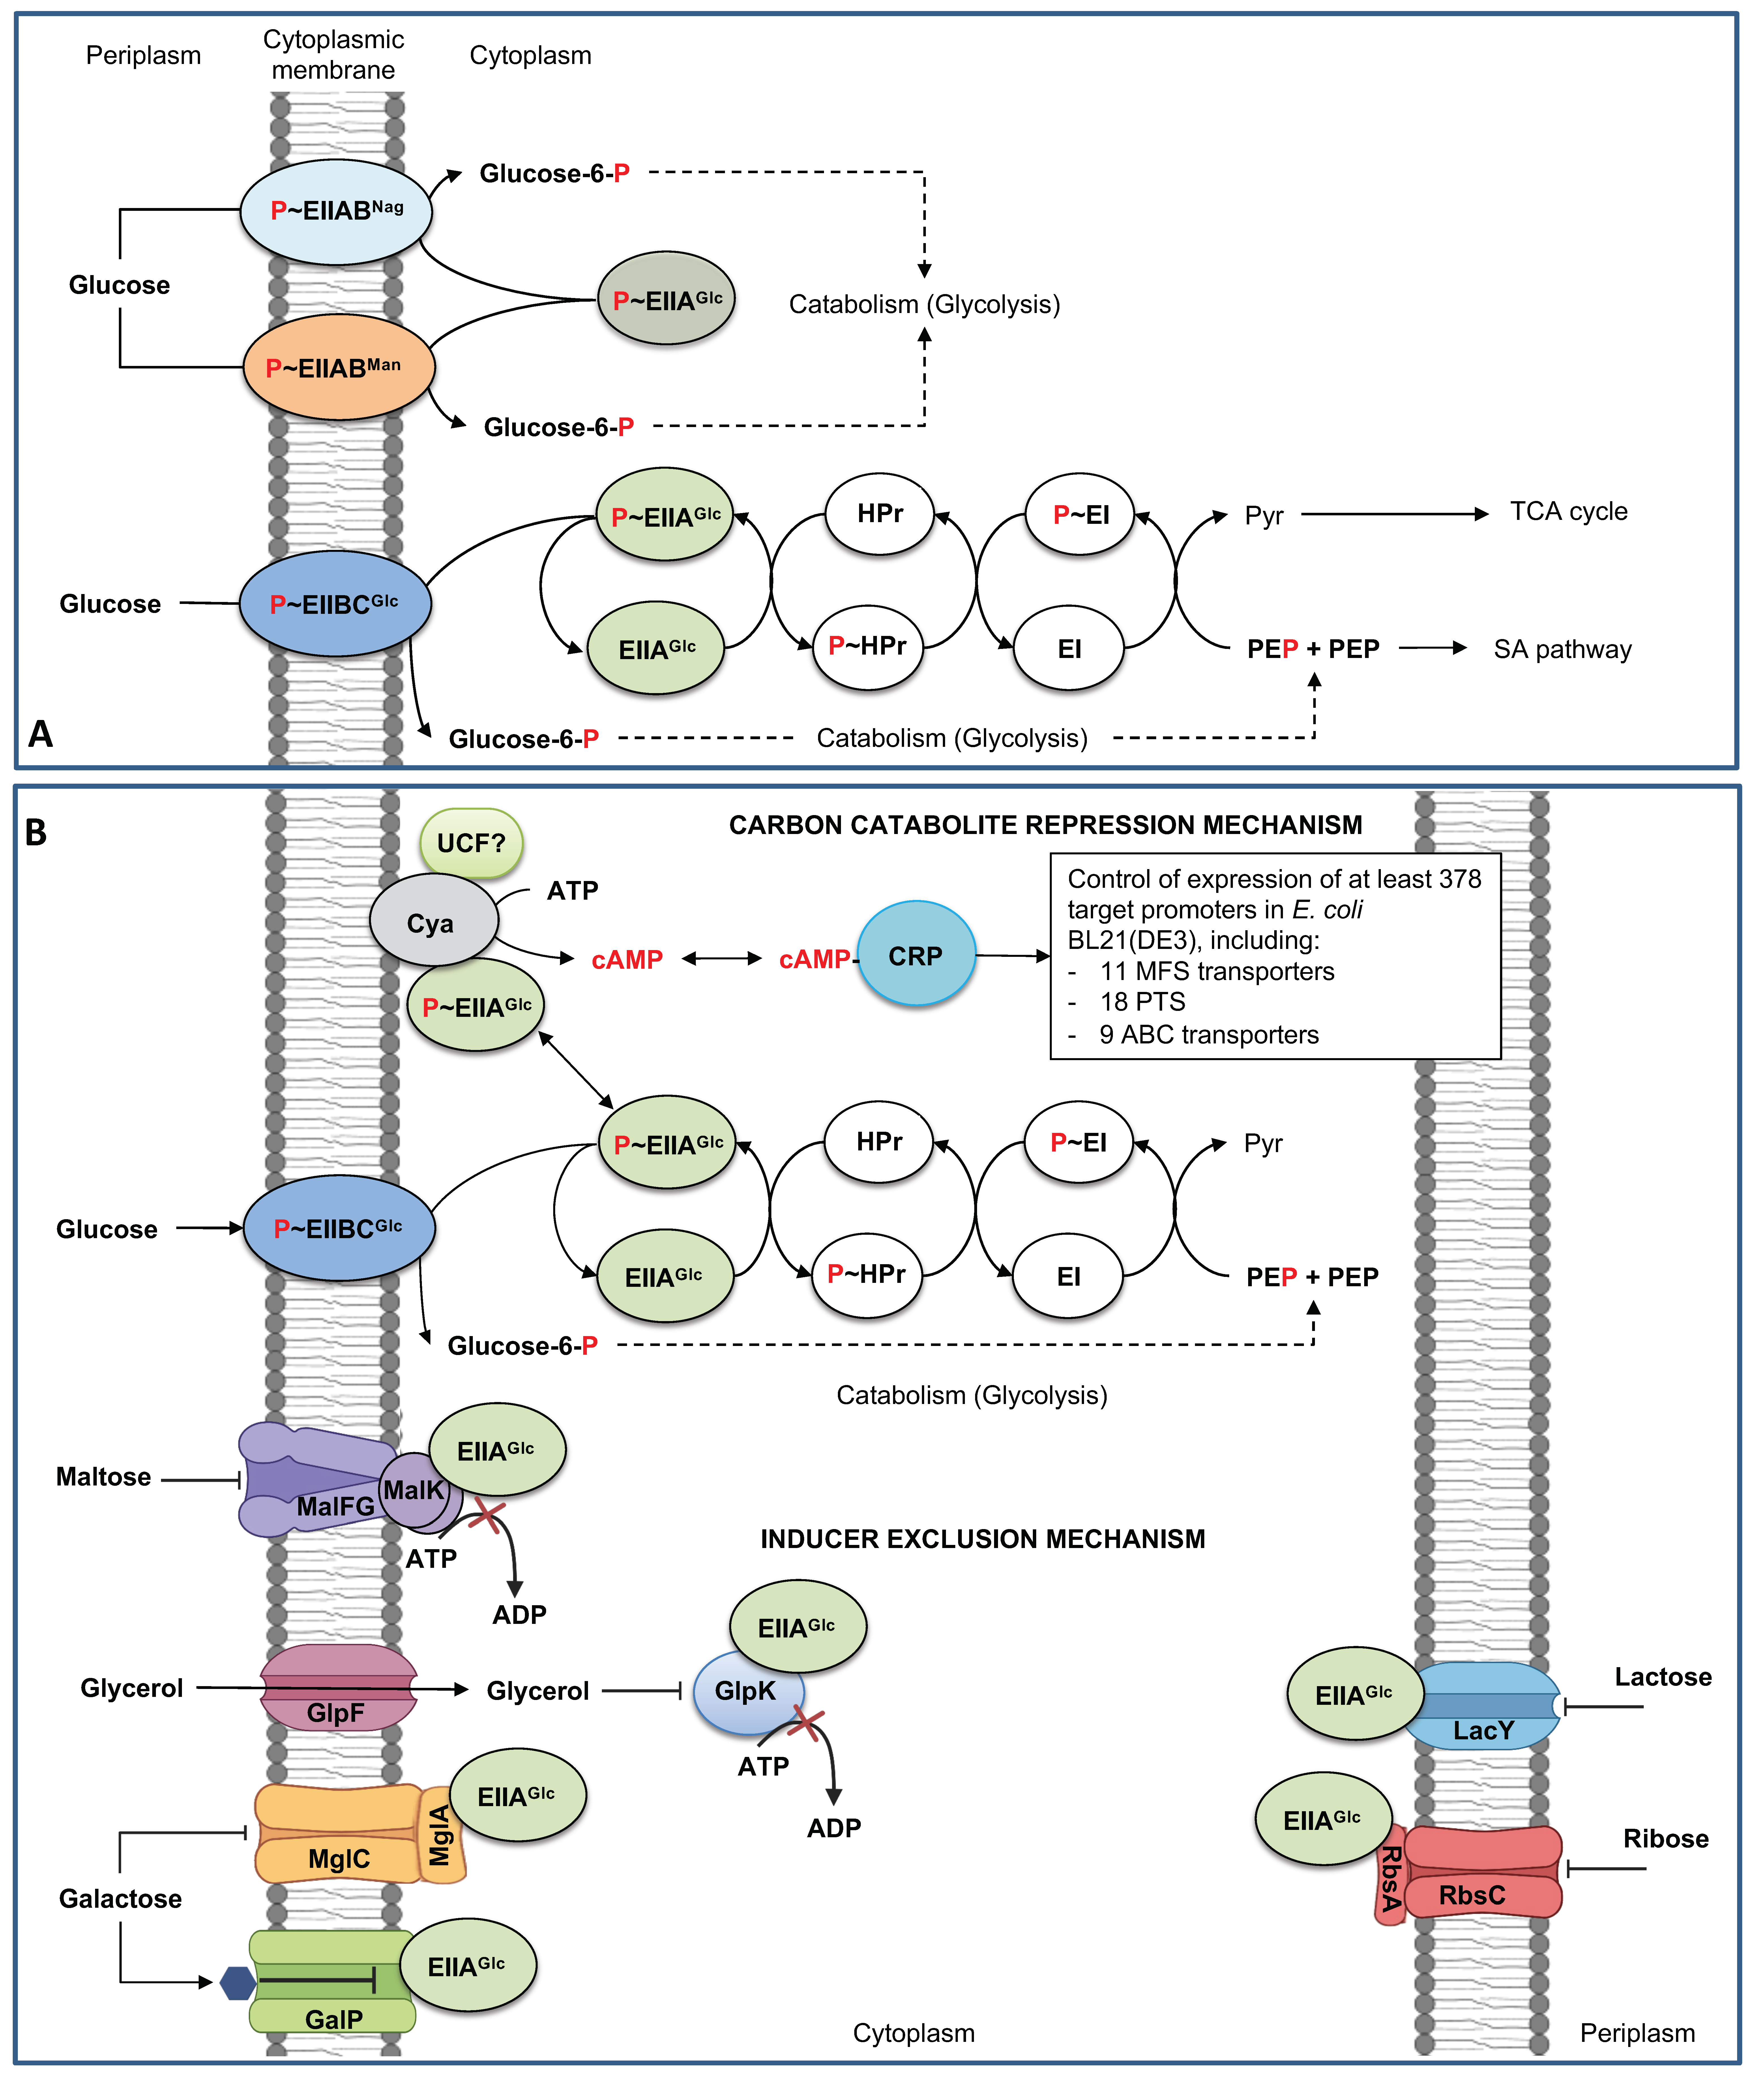 Inhibition of KupA and KupB transport activity by c-di-AMP. E. coli